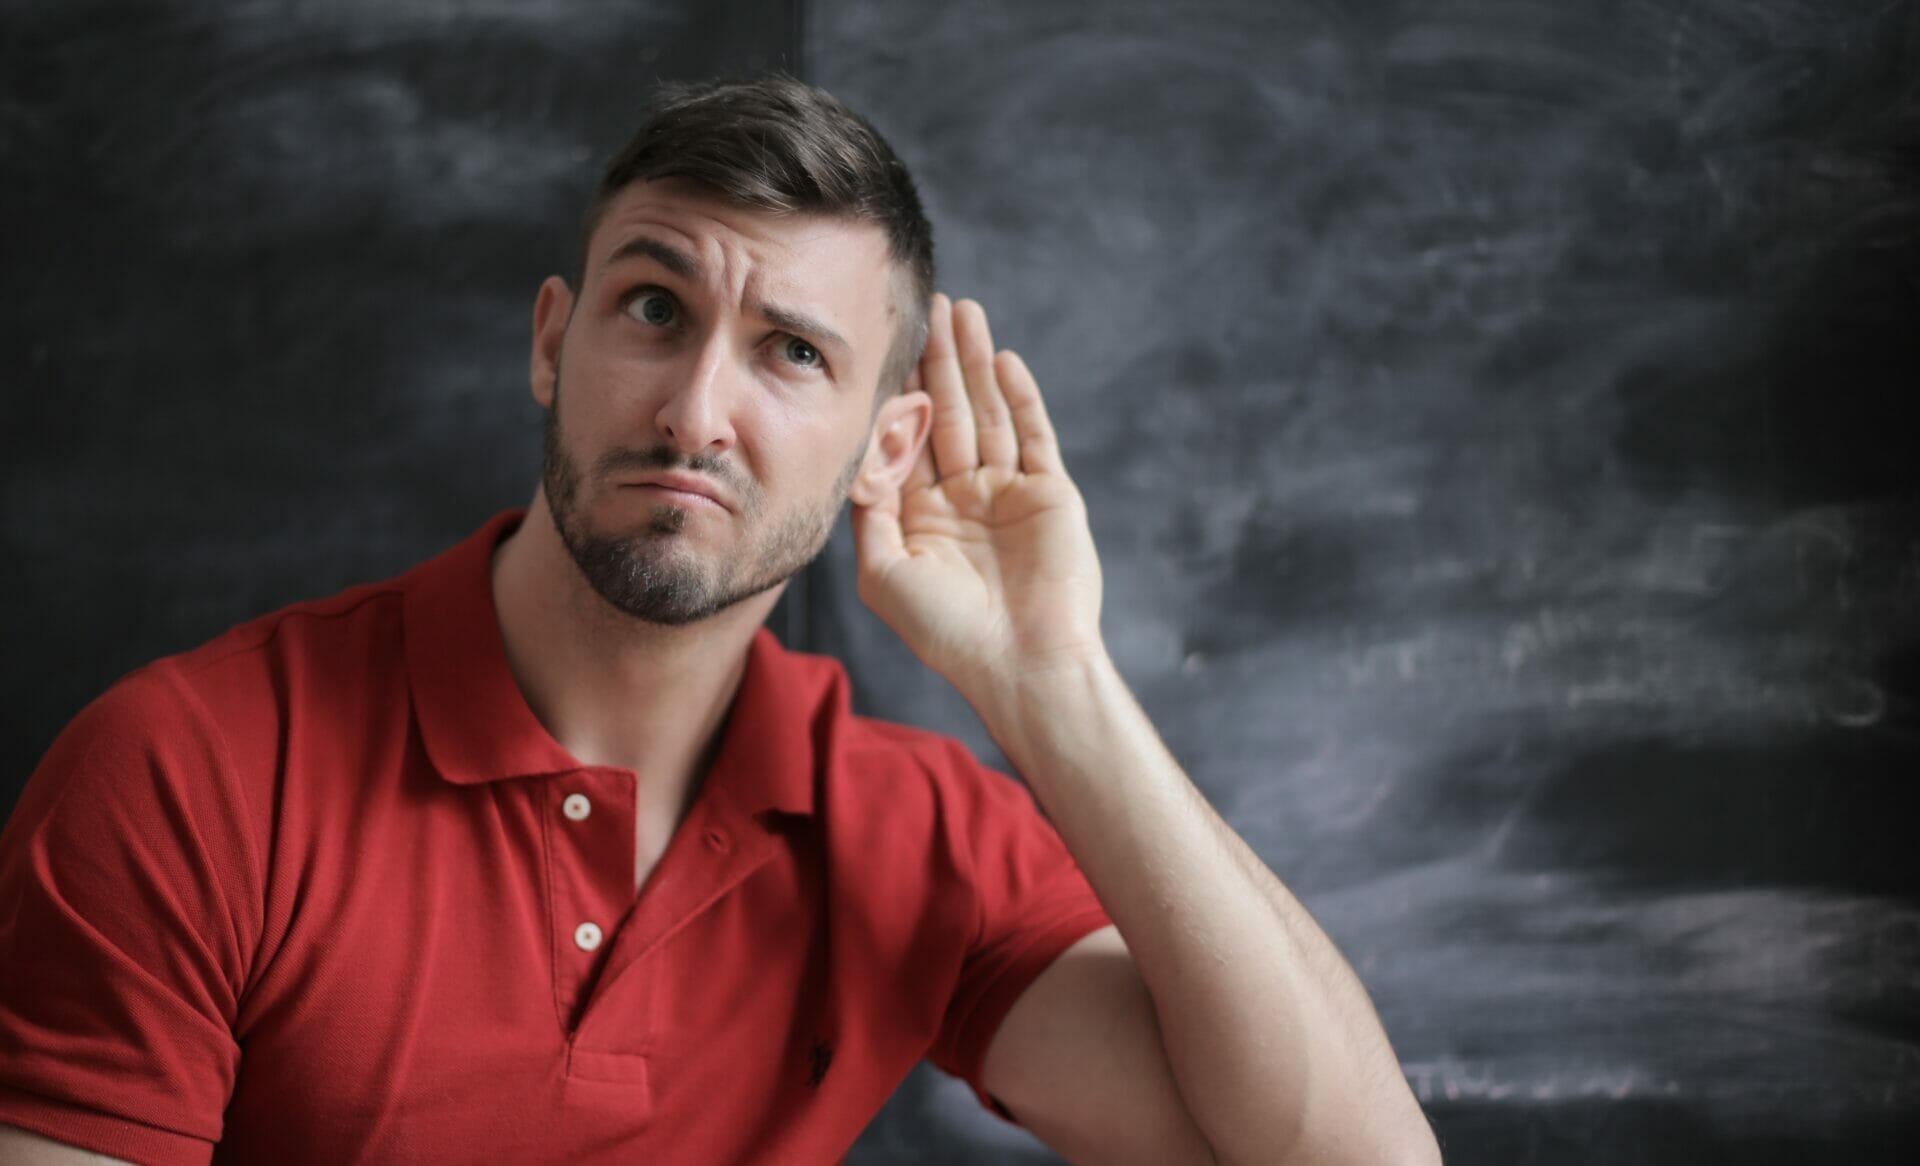 In a room, a man wearing a bright red T-shirt stands, visibly perplexed as he raises his hand to his ear in a signal of struggle, illustrating the difficulties and challenges that individuals encounter in the realm of active listening.